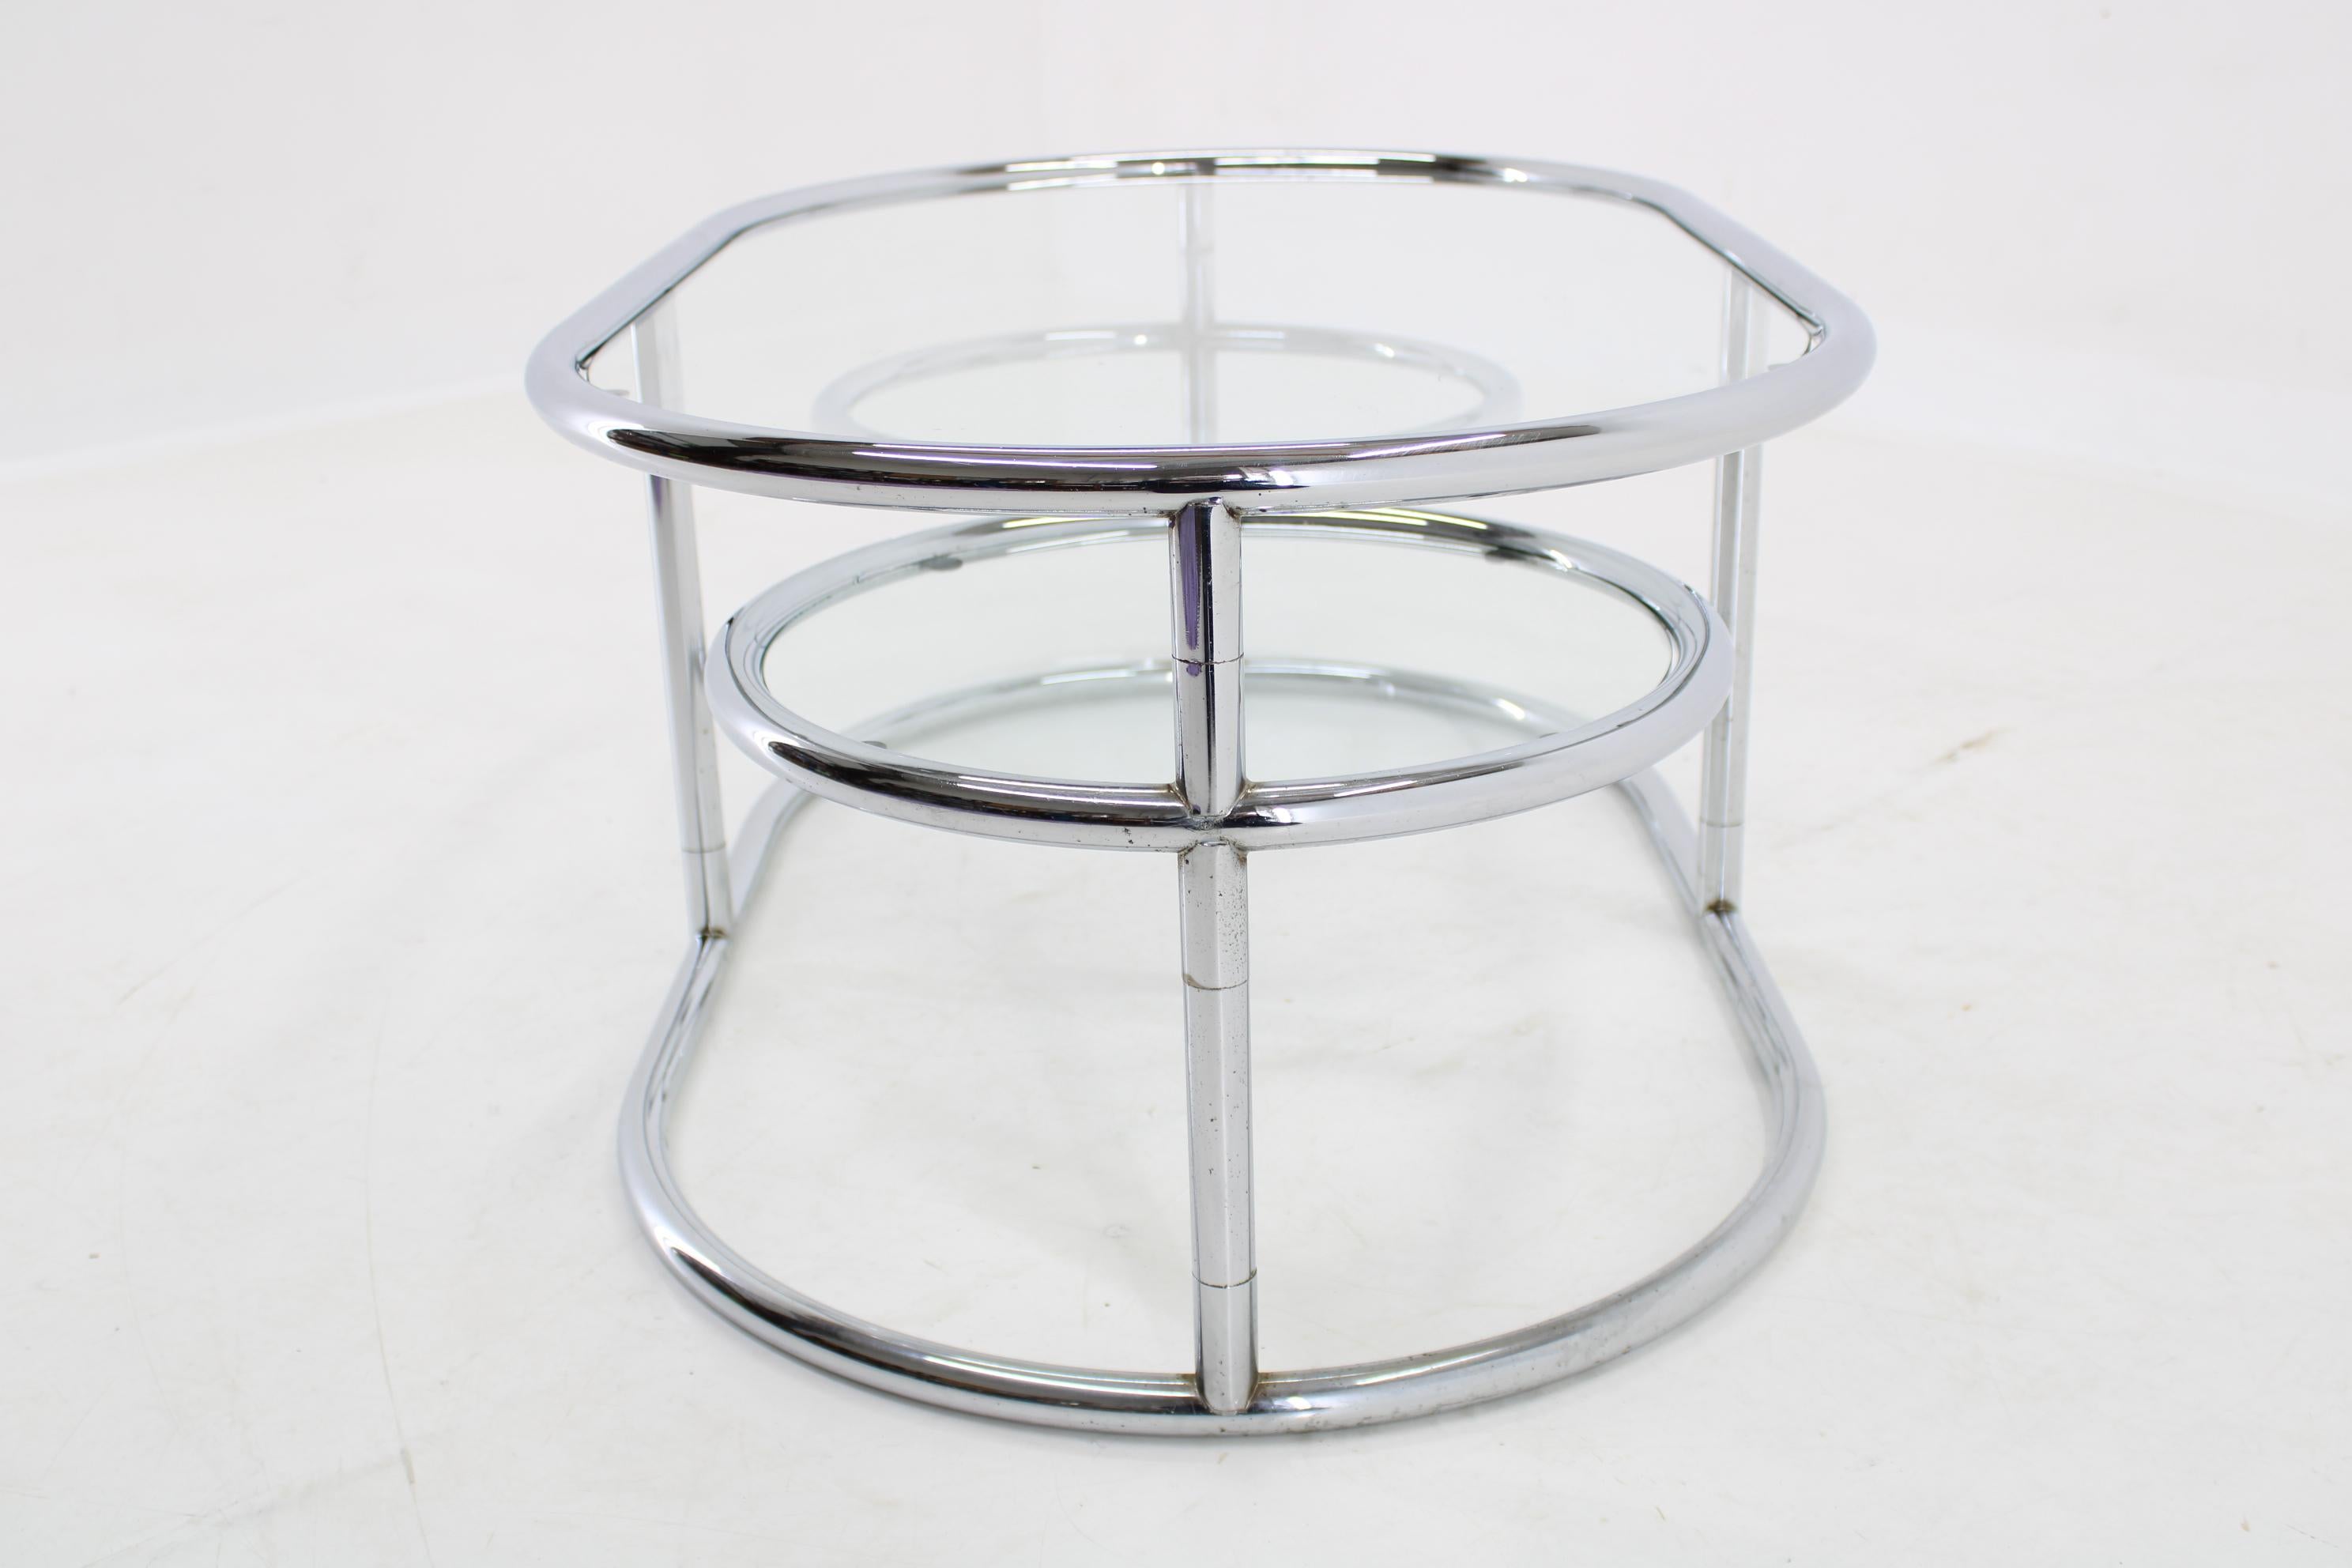 1980s Chrome Plated Tubular Coffee Table with Glass Top, Germany 2